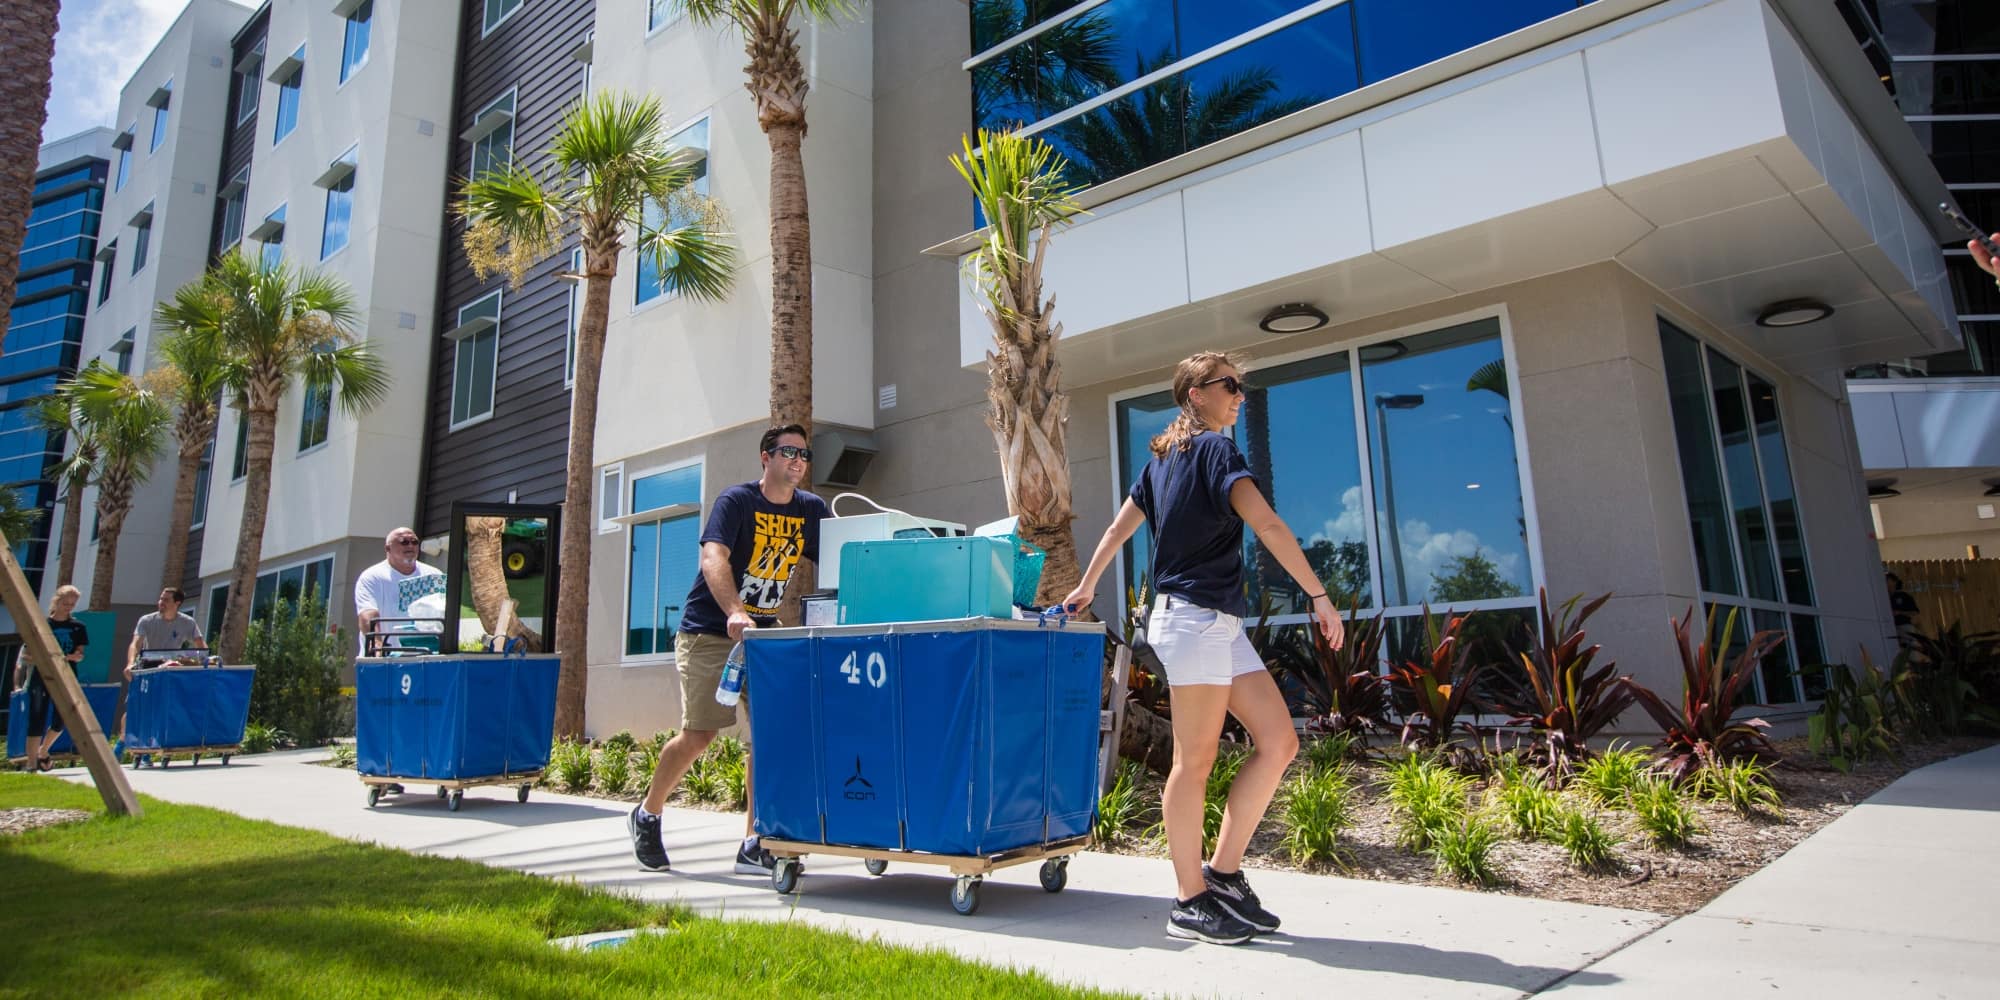 Ready to move in? Residence halls are where you’ll make lifelong connections, enjoy state-of-the-art lounges and facilities and so much more. (Photo: David Massey)